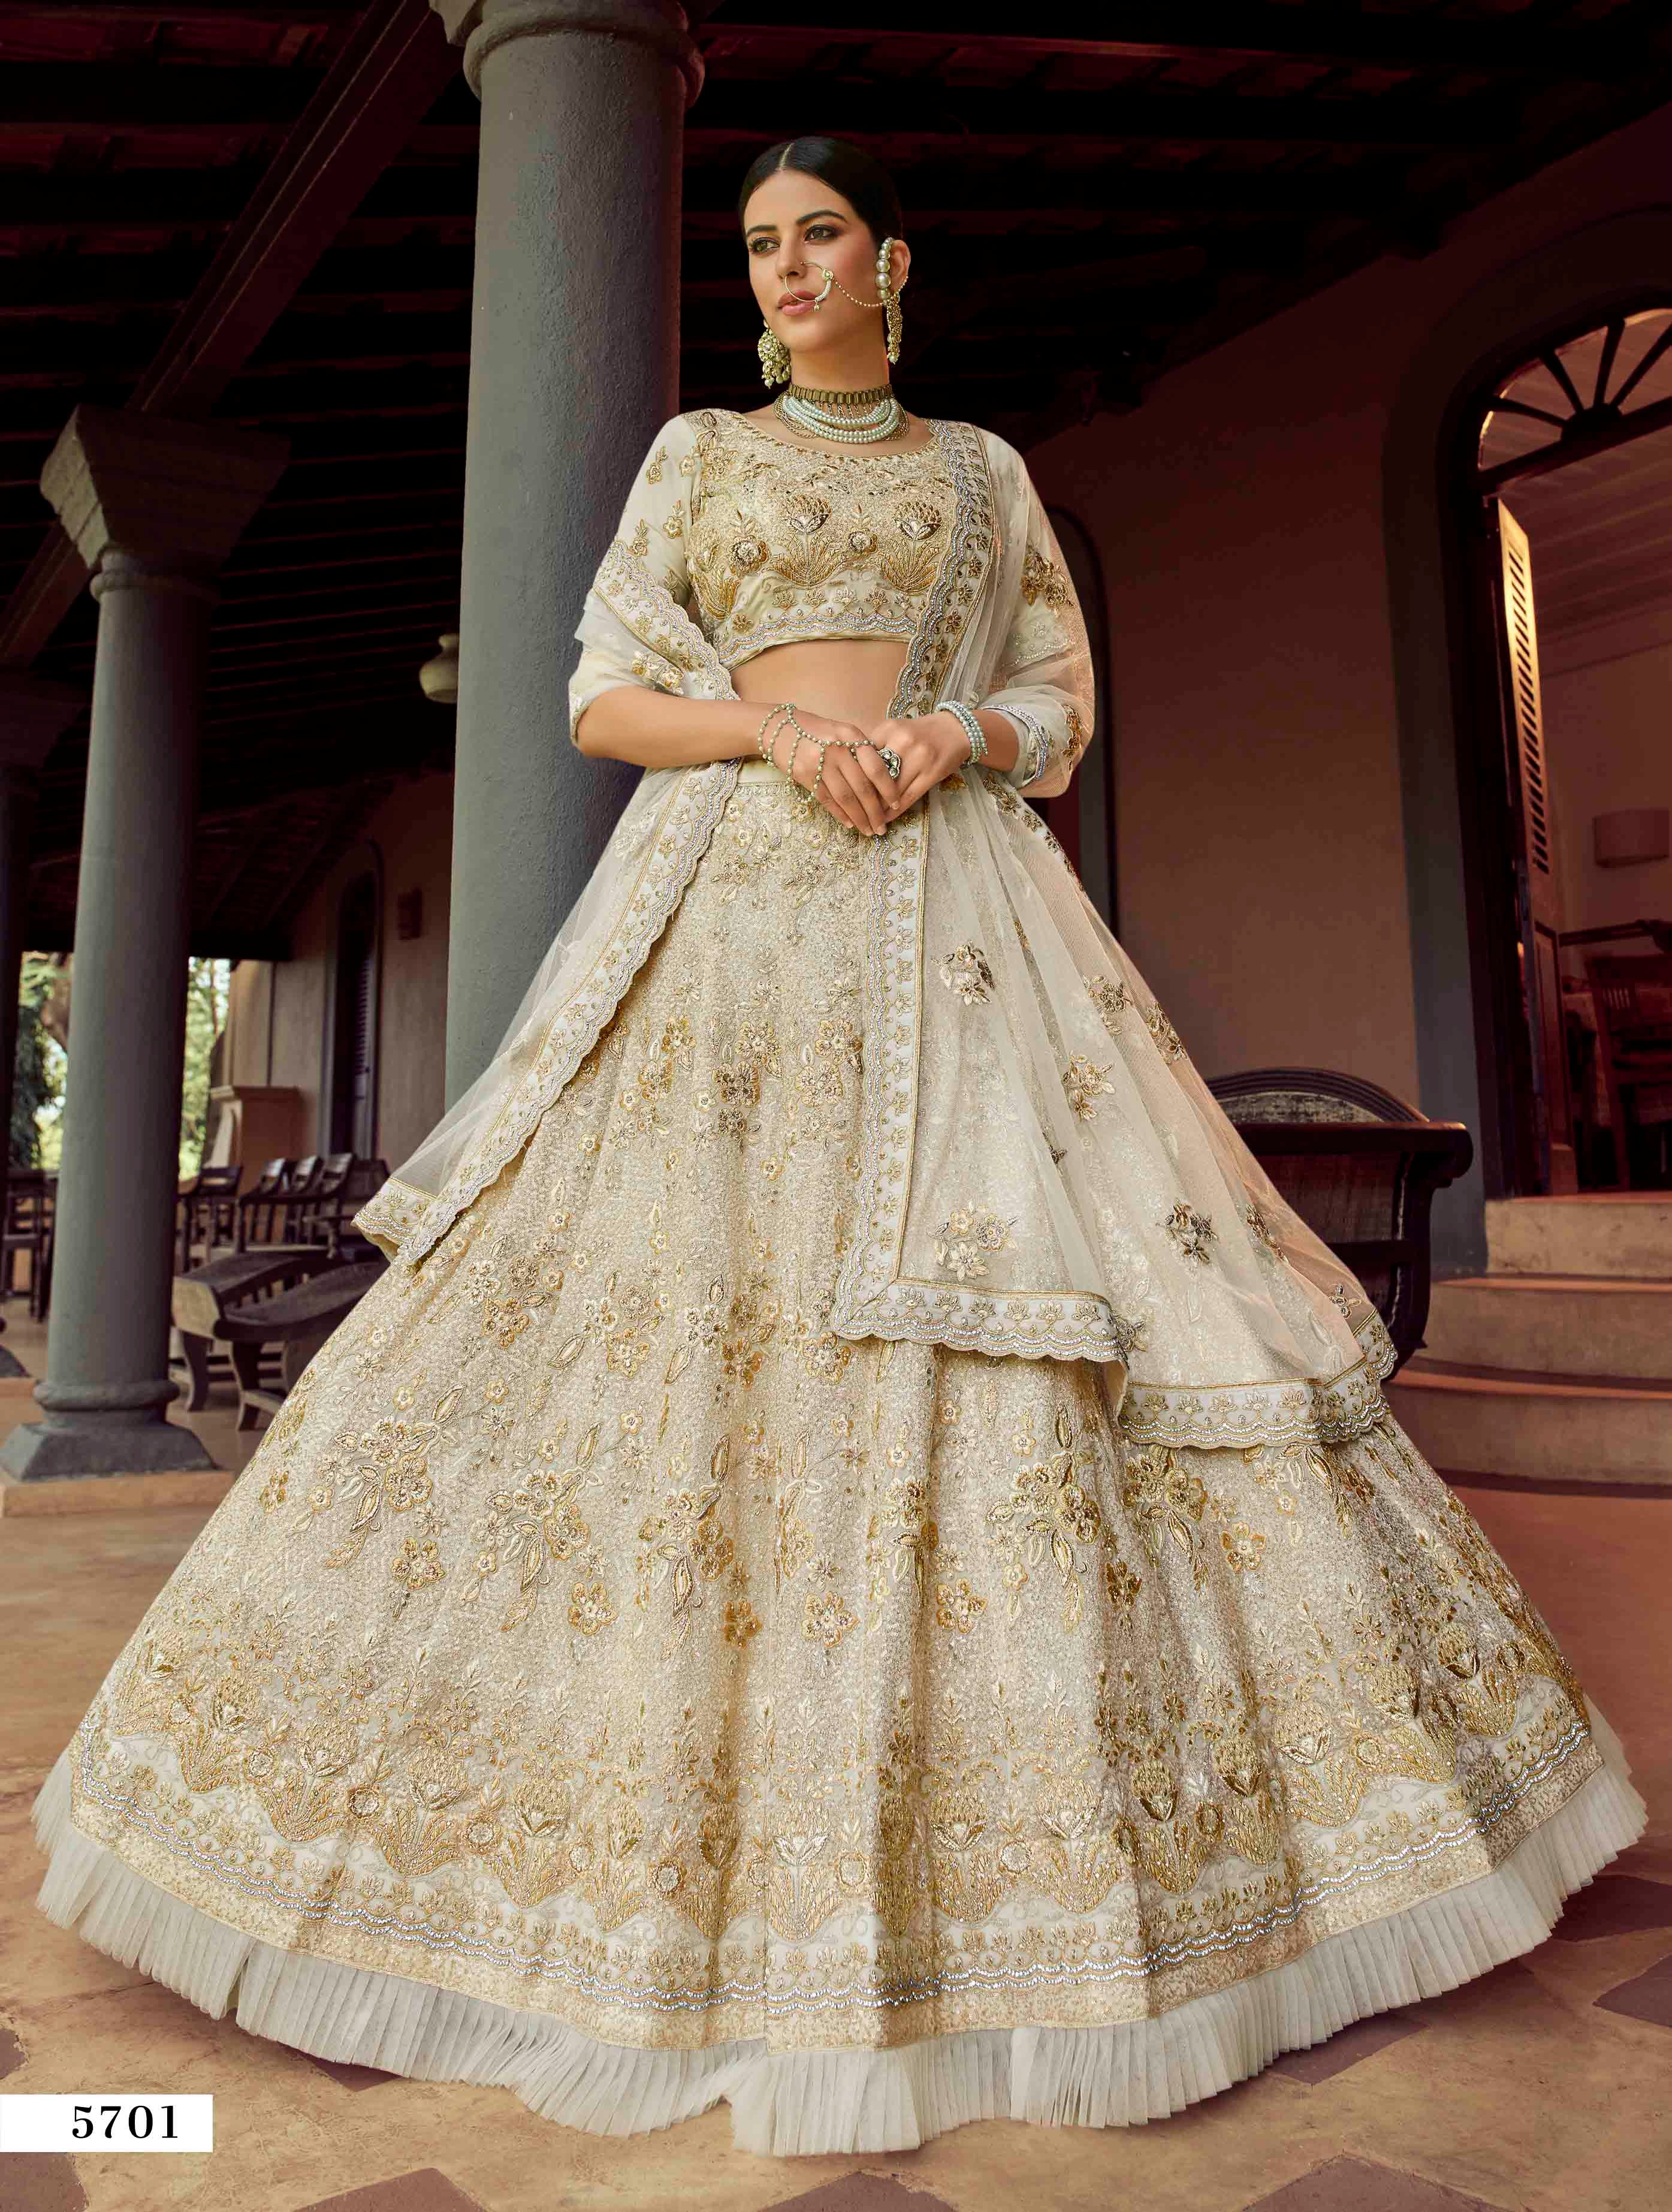 Revisit your roots with Marwar Couture's latest bridal collection featuring  traditional bridal outfits with a modern spin!